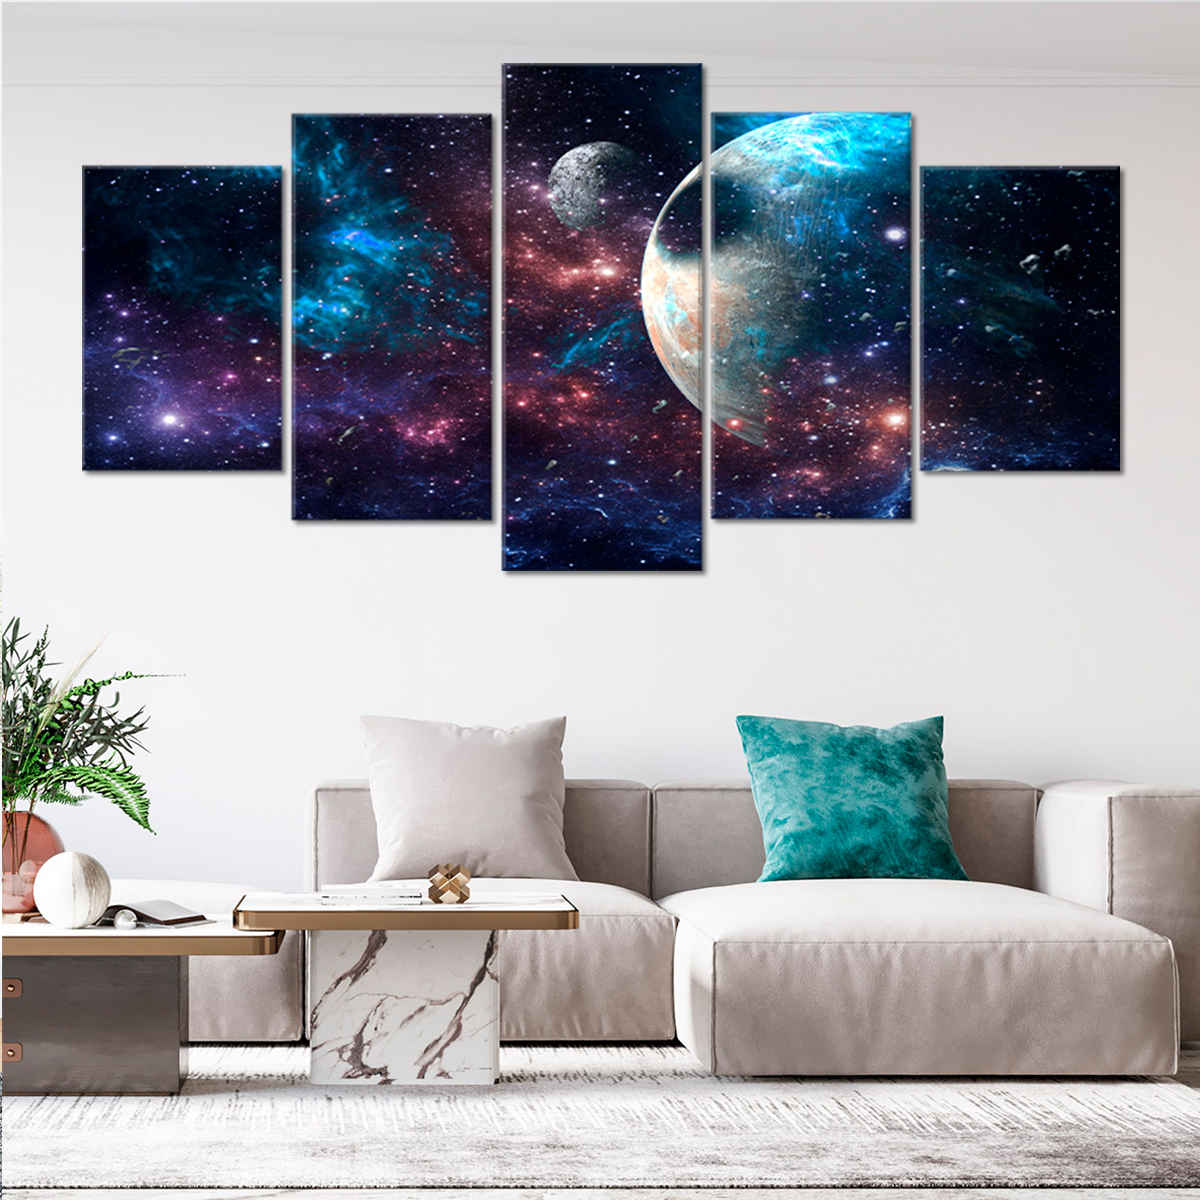  Space Wall Stickers Planets Galaxy Wall Decals Fantasy